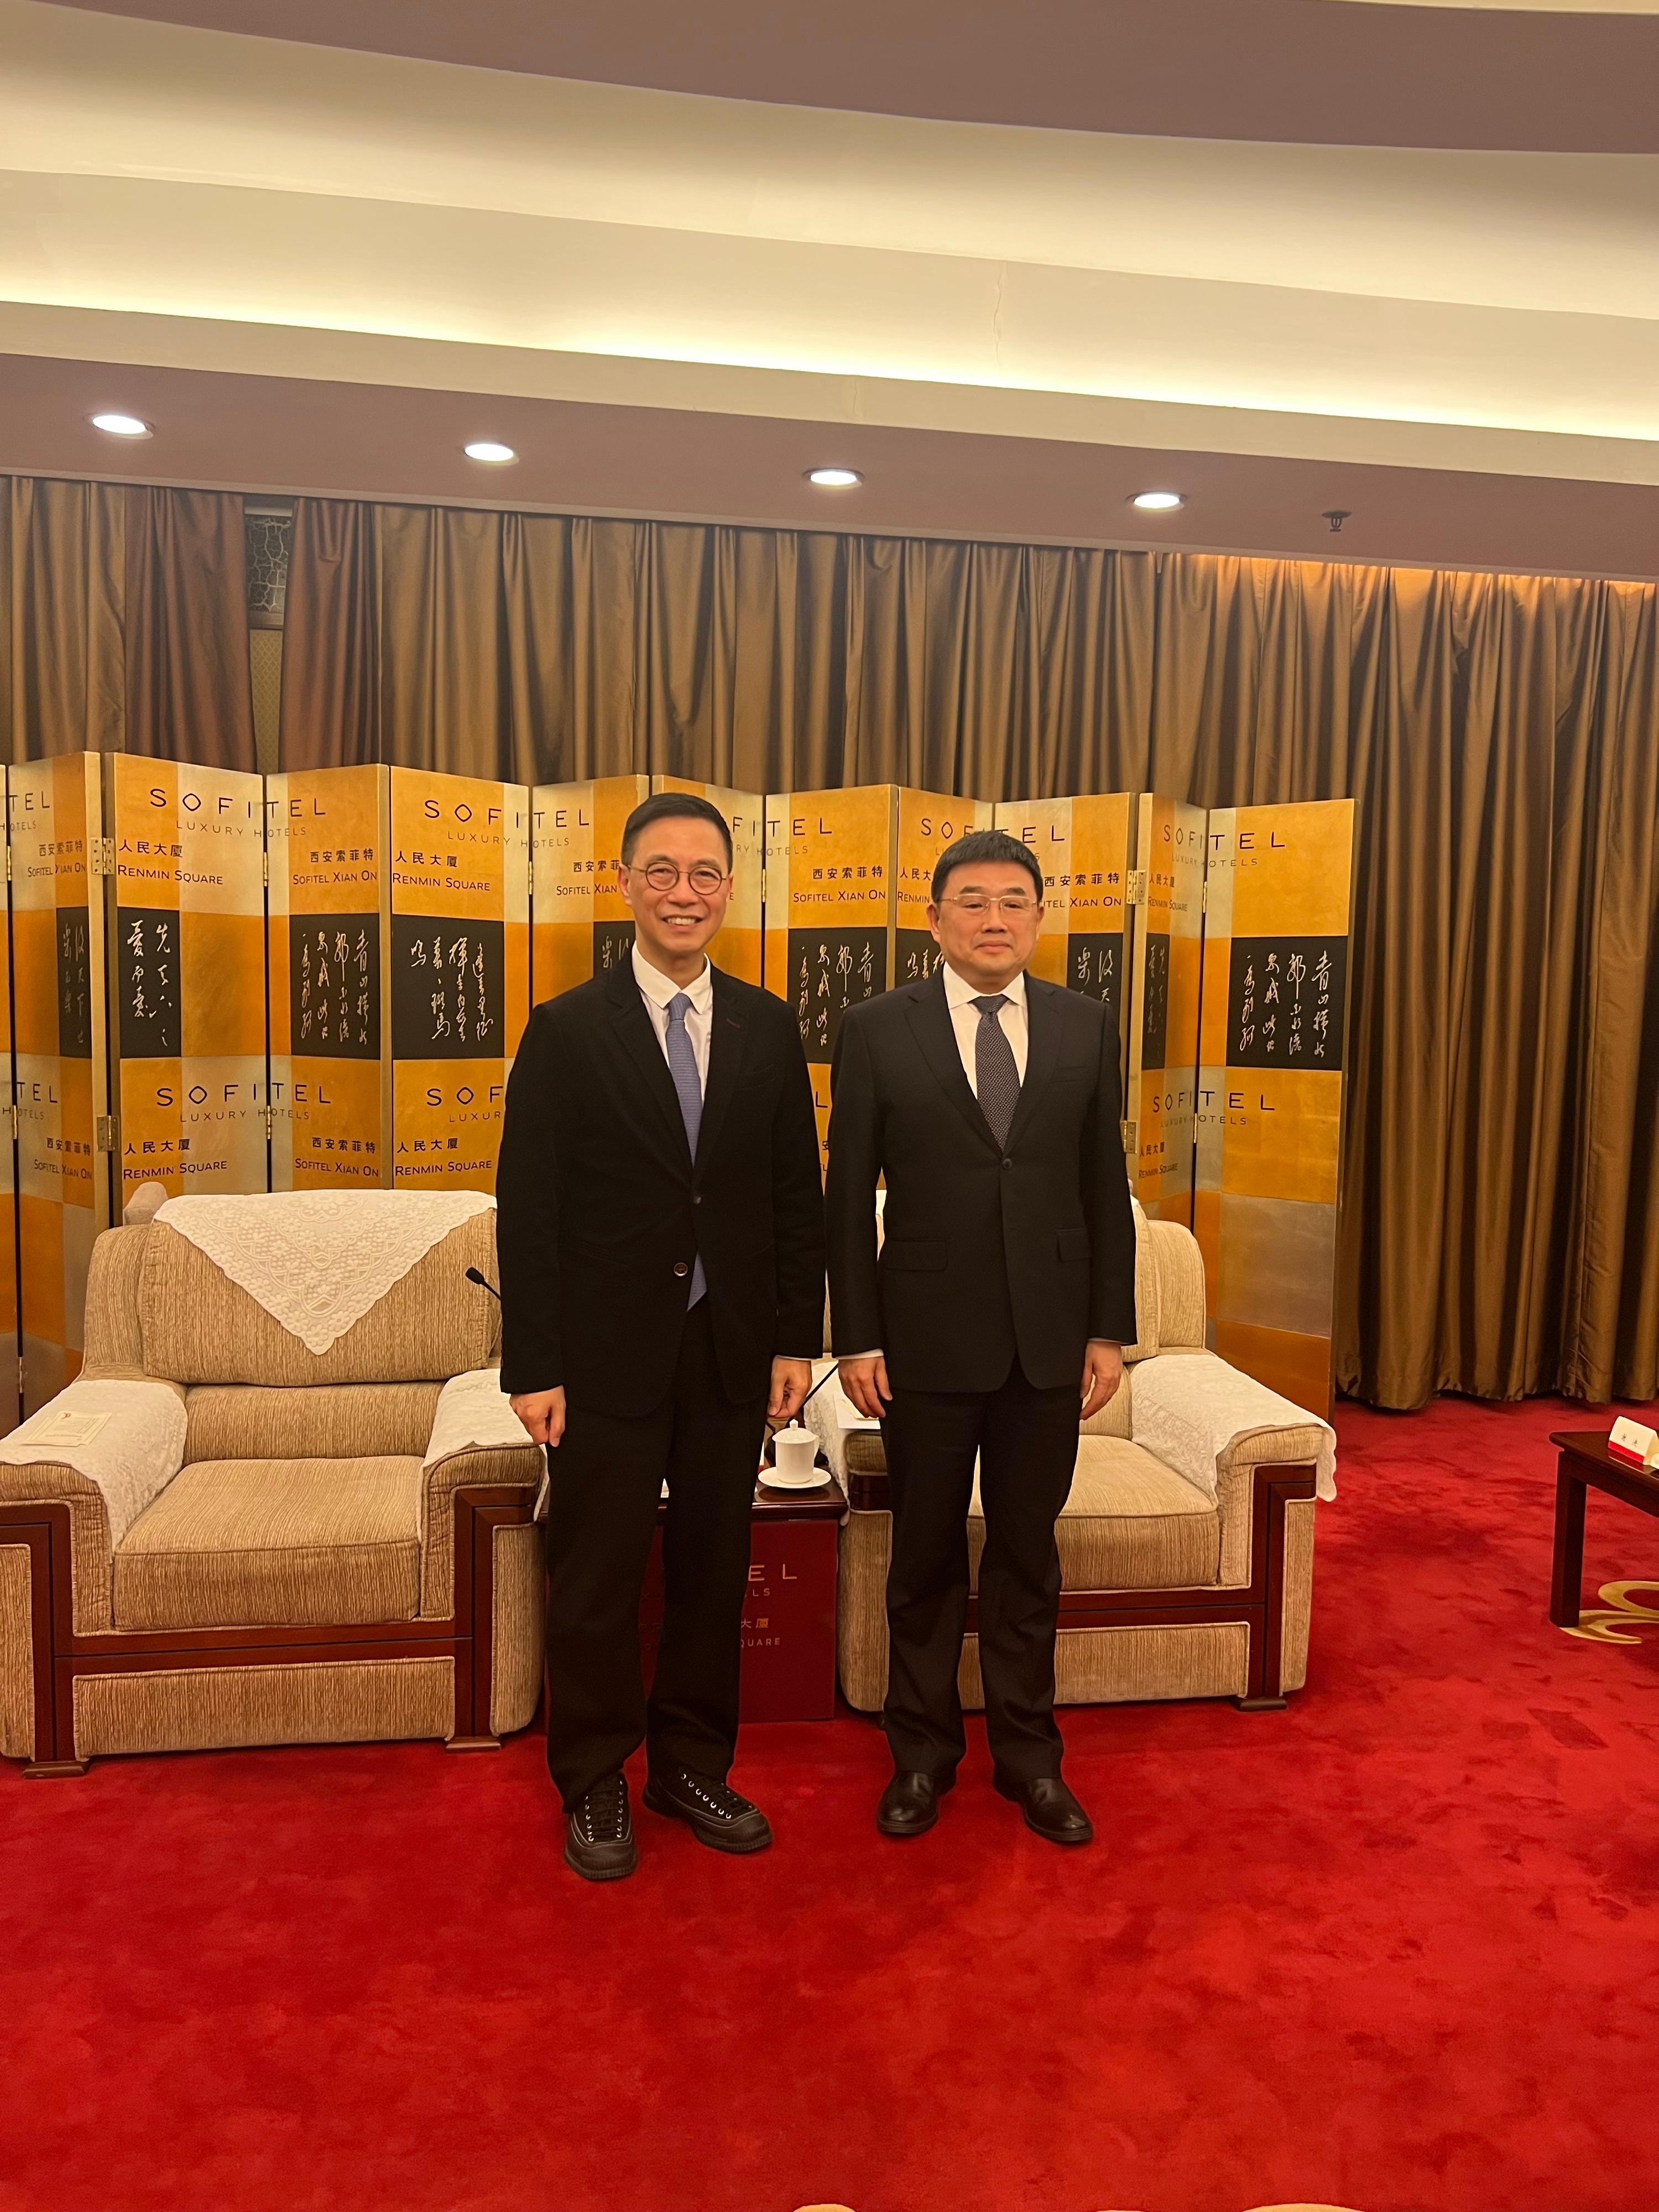 The Secretary for Culture, Sports and Tourism, Mr Kevin Yeung (left), visited Xi'an and Qingdao to promote Hong Kong tourism. On the first day of the visit (March 12), he meets with Vice Governor of the Shaanxi Provincial Government Mr Xu Mingfei (right) in Xi'an to exchange views on tourism developments.